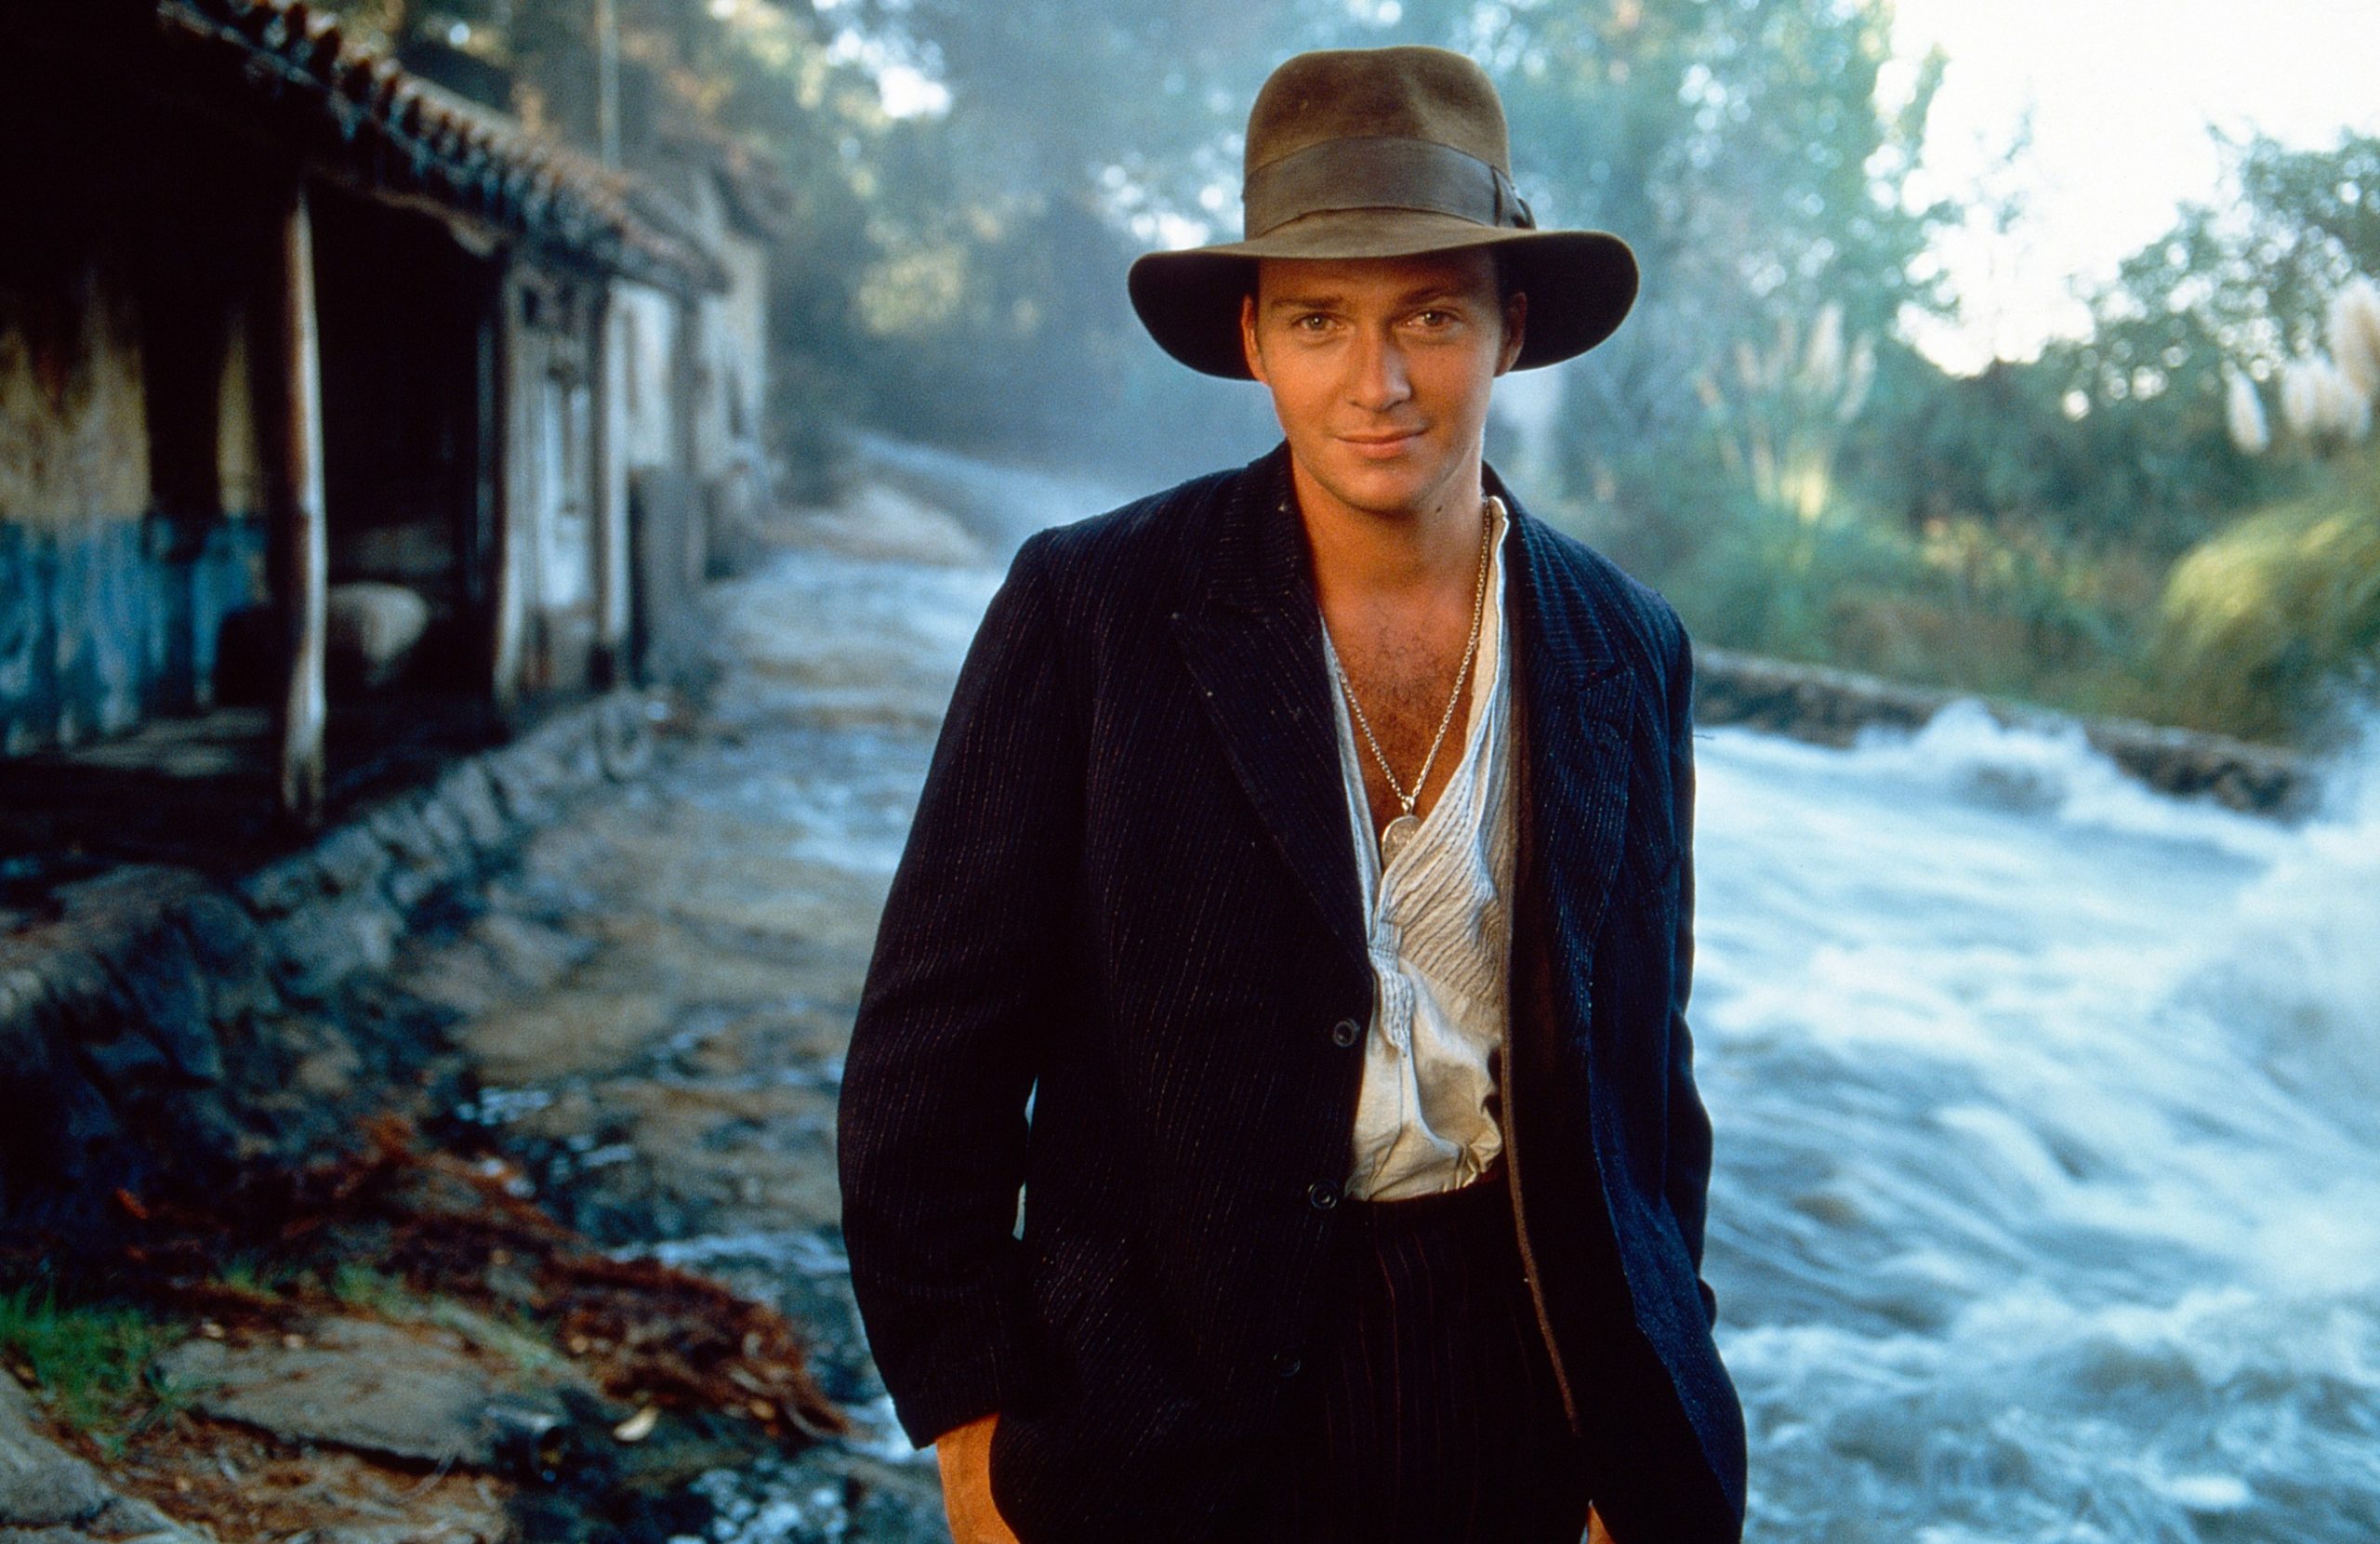 THE YOUNG INDIANA JONES CHRONICLES, Sean Patrick Flanery, 1992-93, ©Lucasfilm Ltd./courtesy Everett Collection